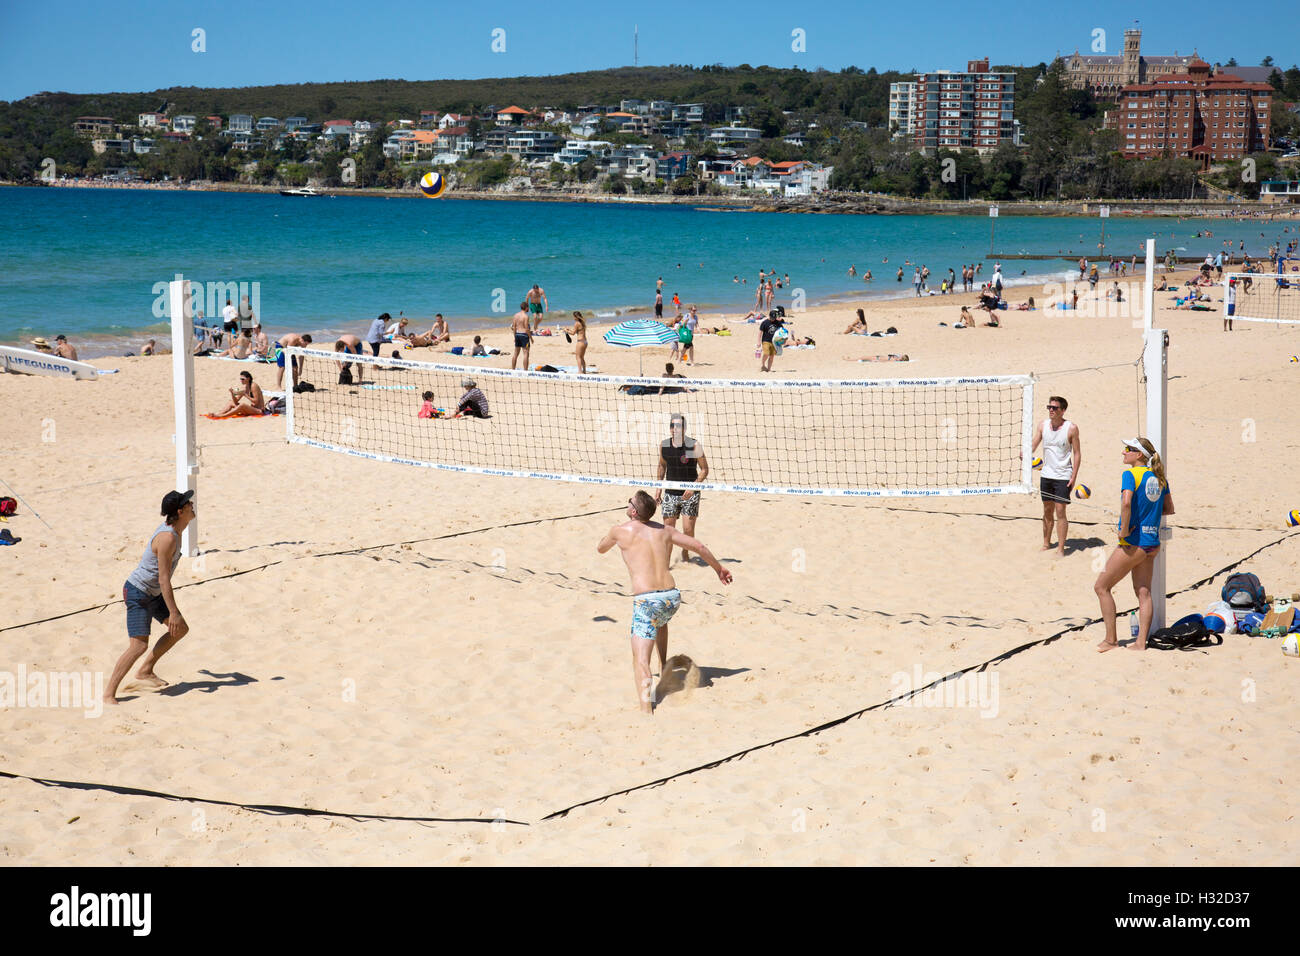 Teams playing beach volleyball on Manly Beach in Sydney,Australia Stock Photo